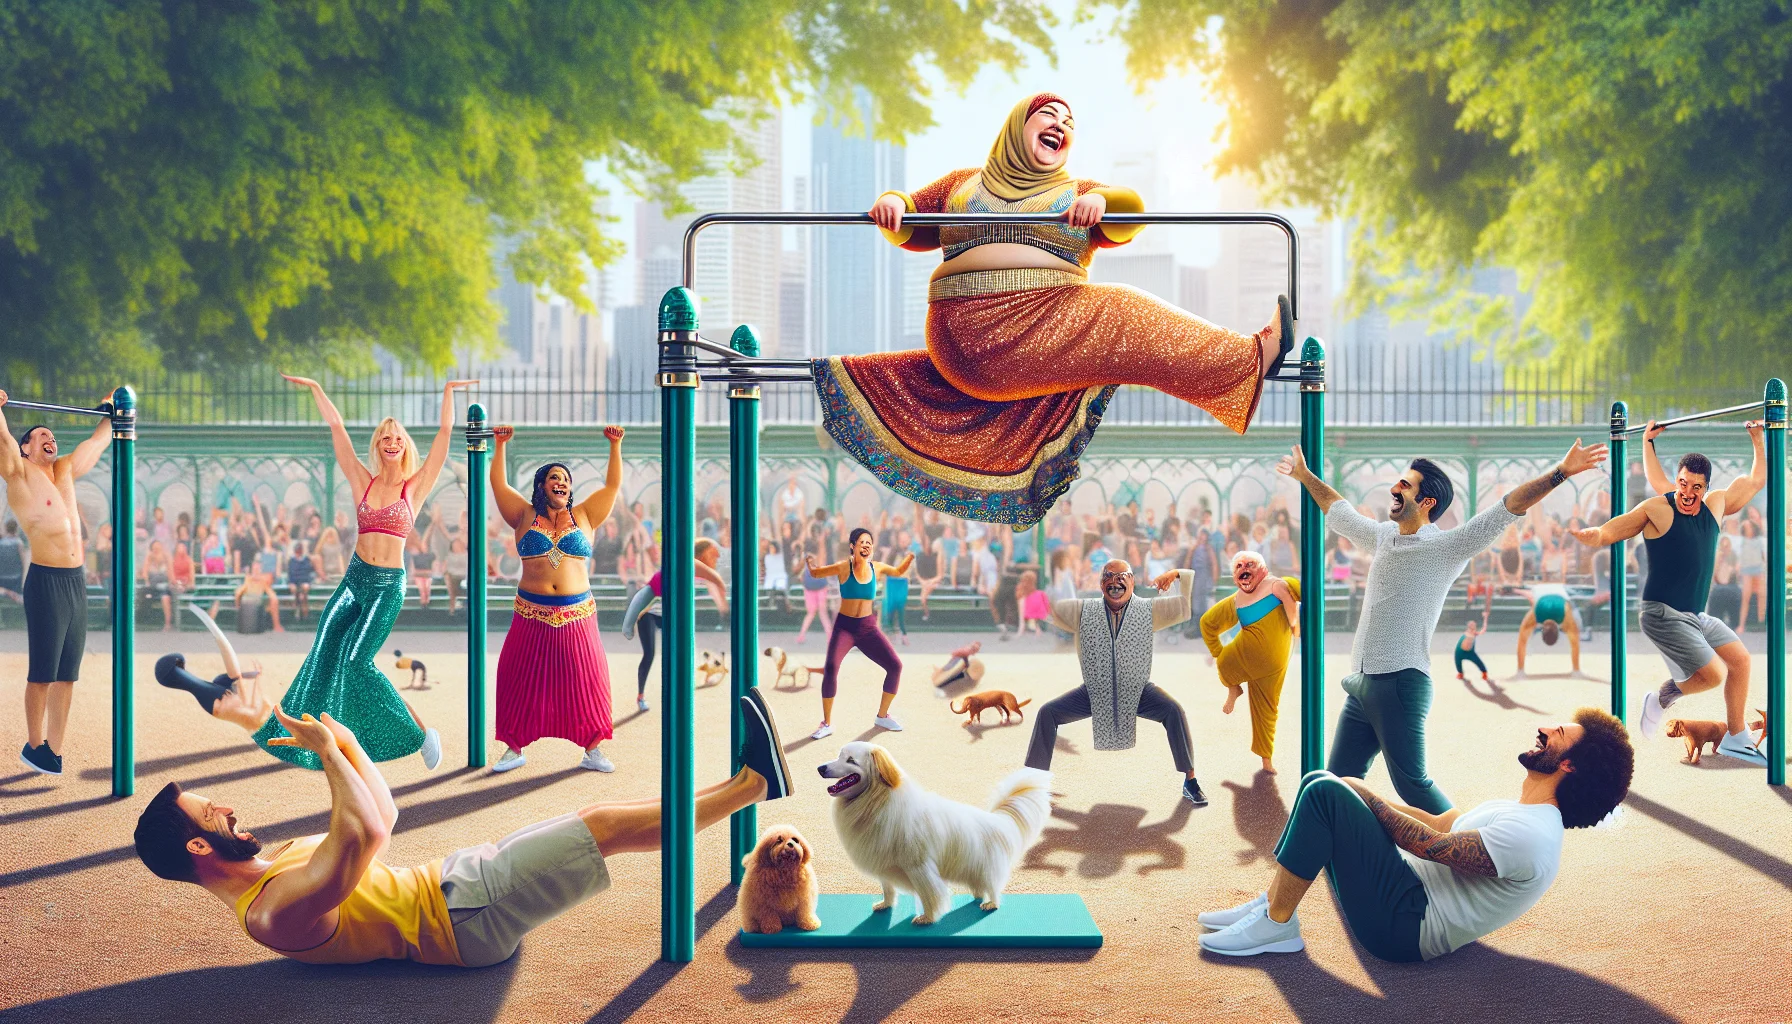 Imagine a humorous scene of a calisthenics ab workout at a public park. The view is filled with people of different descents and genders, all participating in the fancy and comical workout. A Caucasian woman is on a pull-up bar, belly-dancing mid-air, while a South Asian man does handstands with a huge grin on his face. A Middle Eastern woman is laughingly struggling with her push-ups as a white man humorously tries to use his pet dog as weights. The setting is bright, vibrant, and cheerful, subtly inspiring the viewers to join in the fun workout routine.